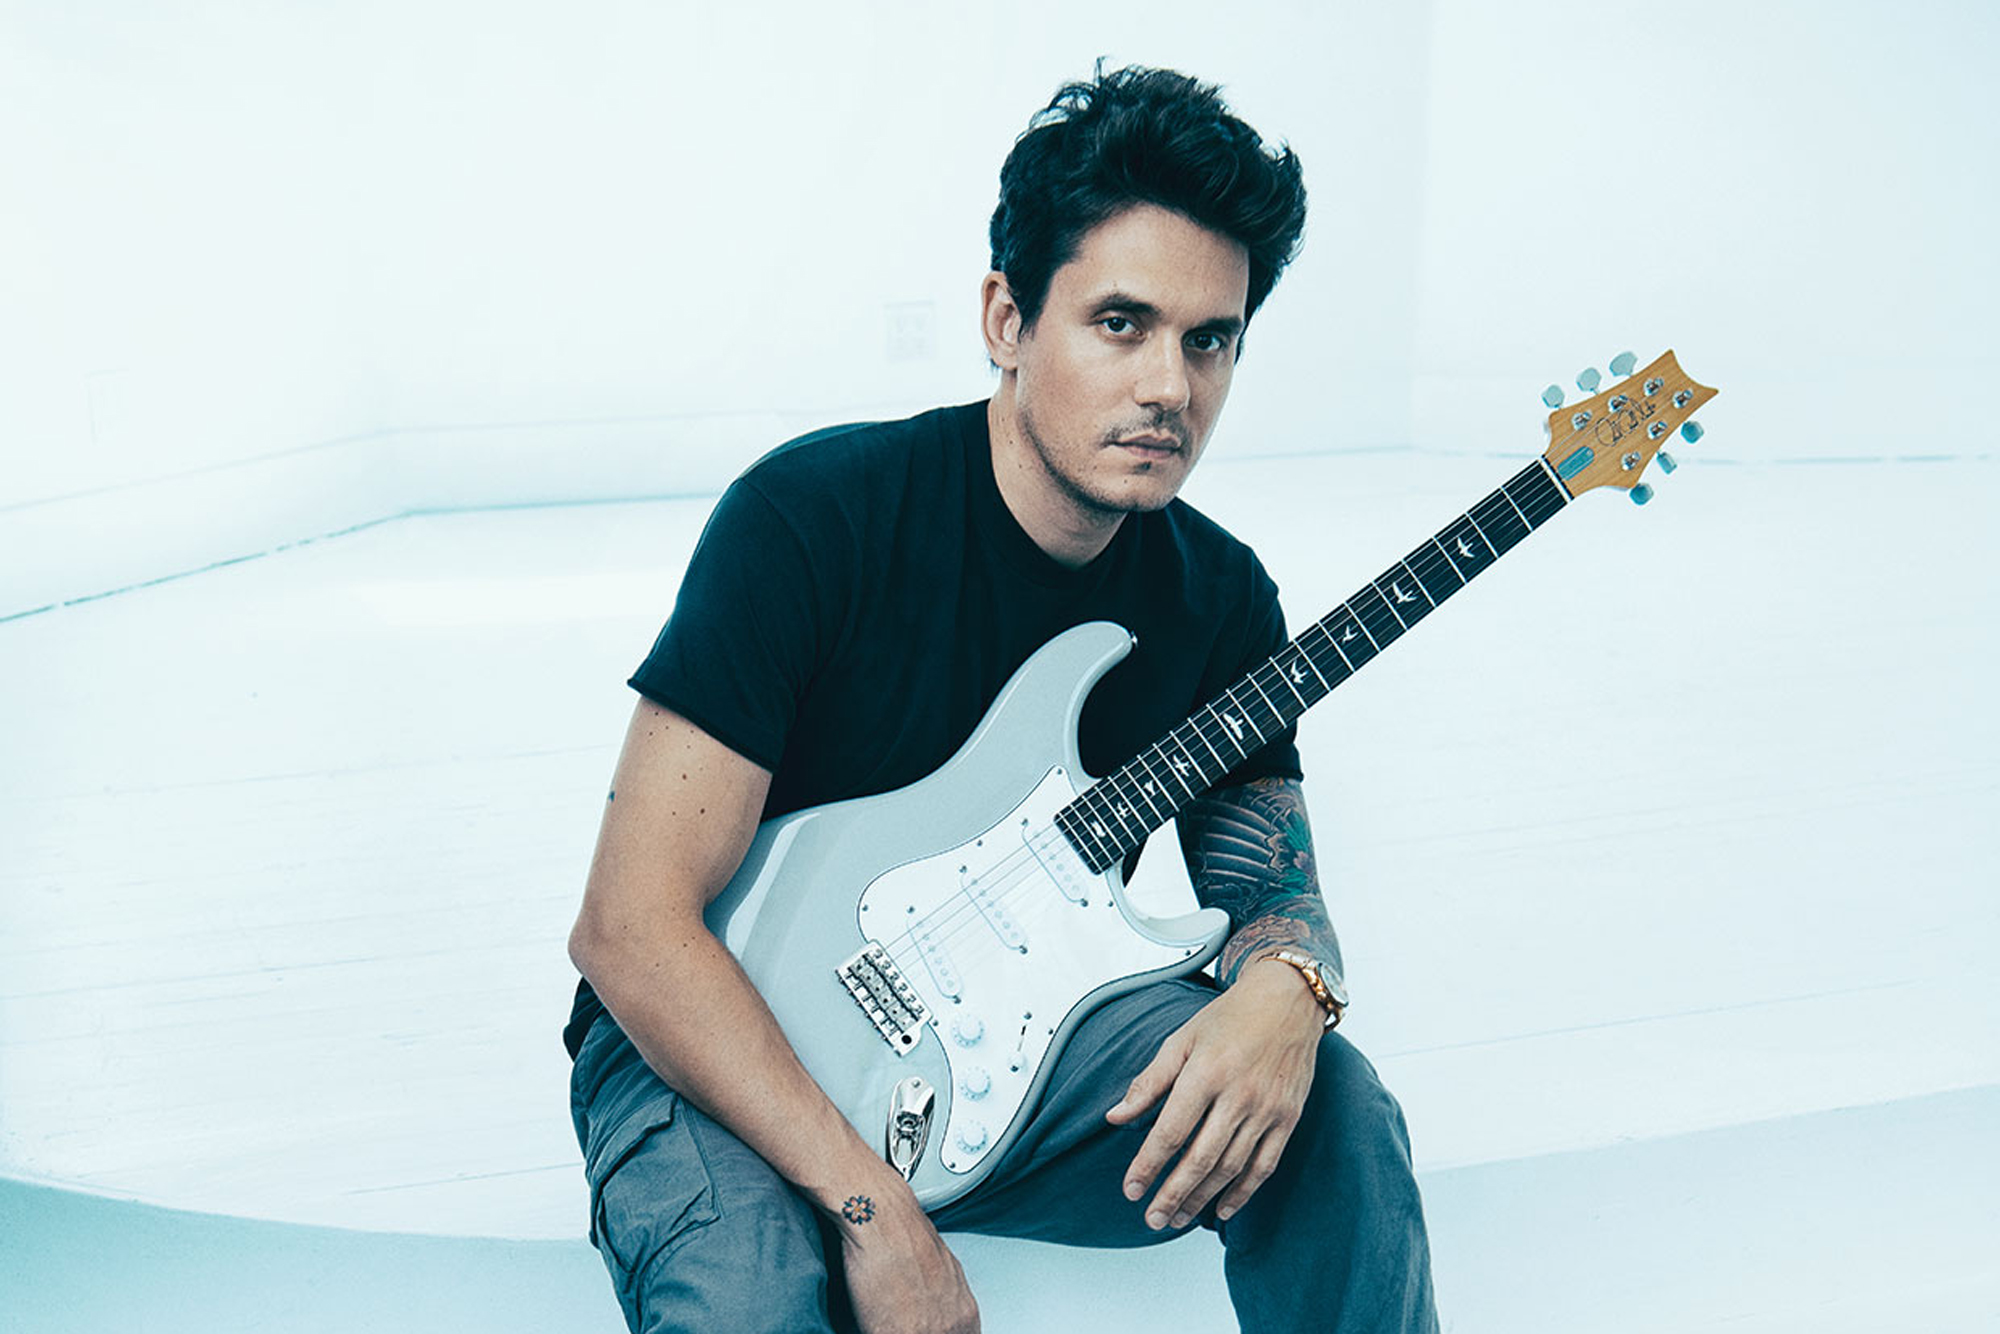 John Mayer I haven’t been a dk in many years